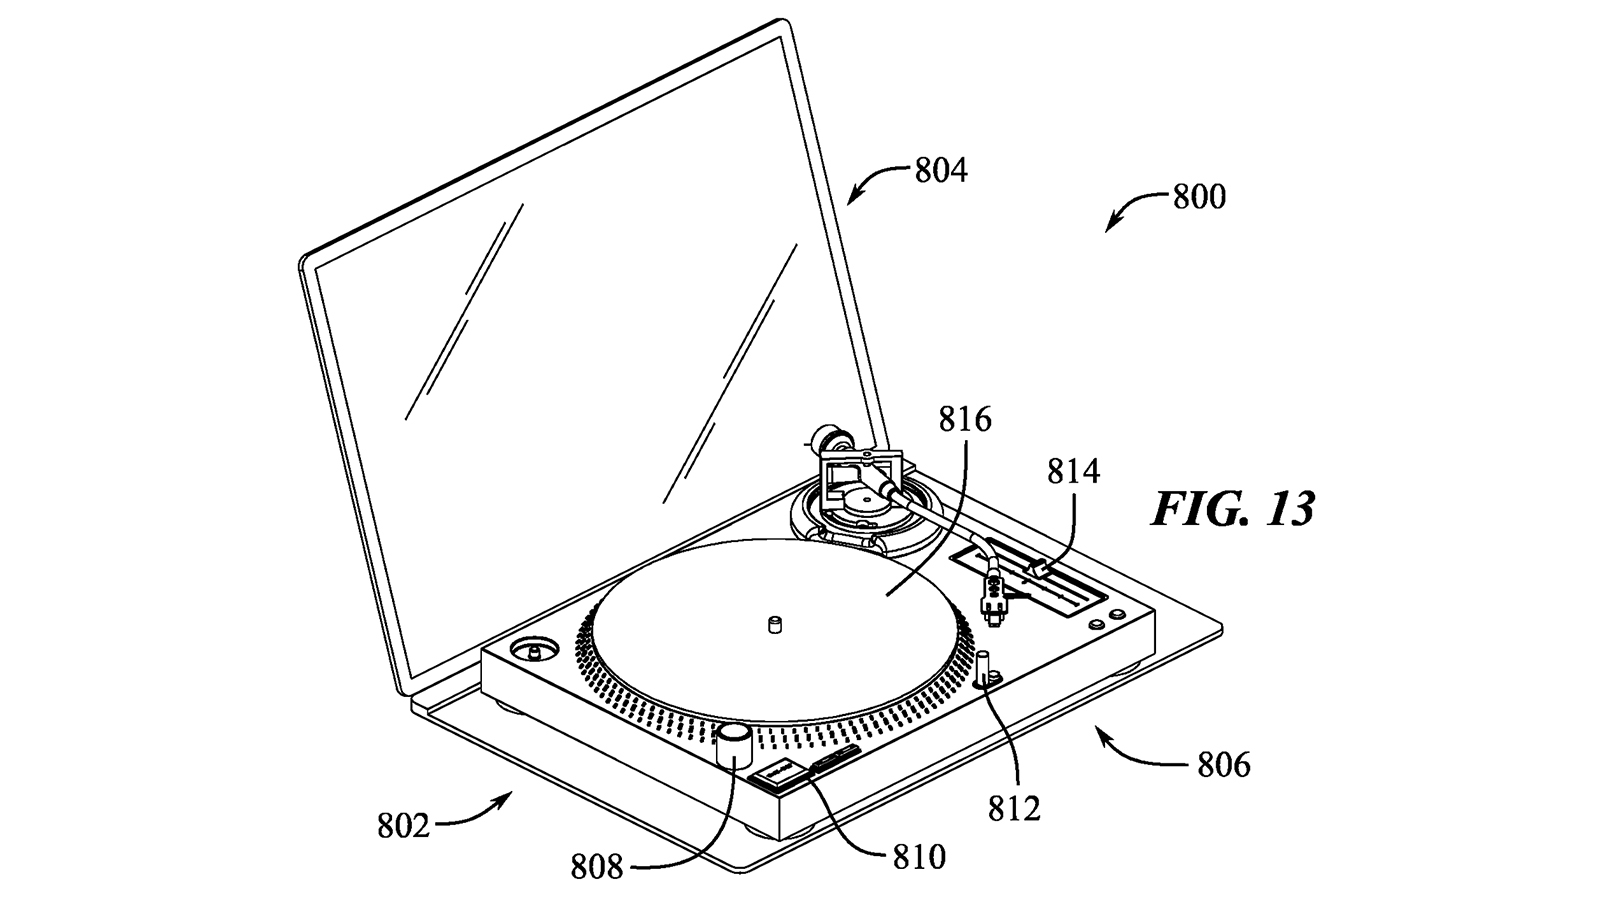 Apple patent showing a display and record player